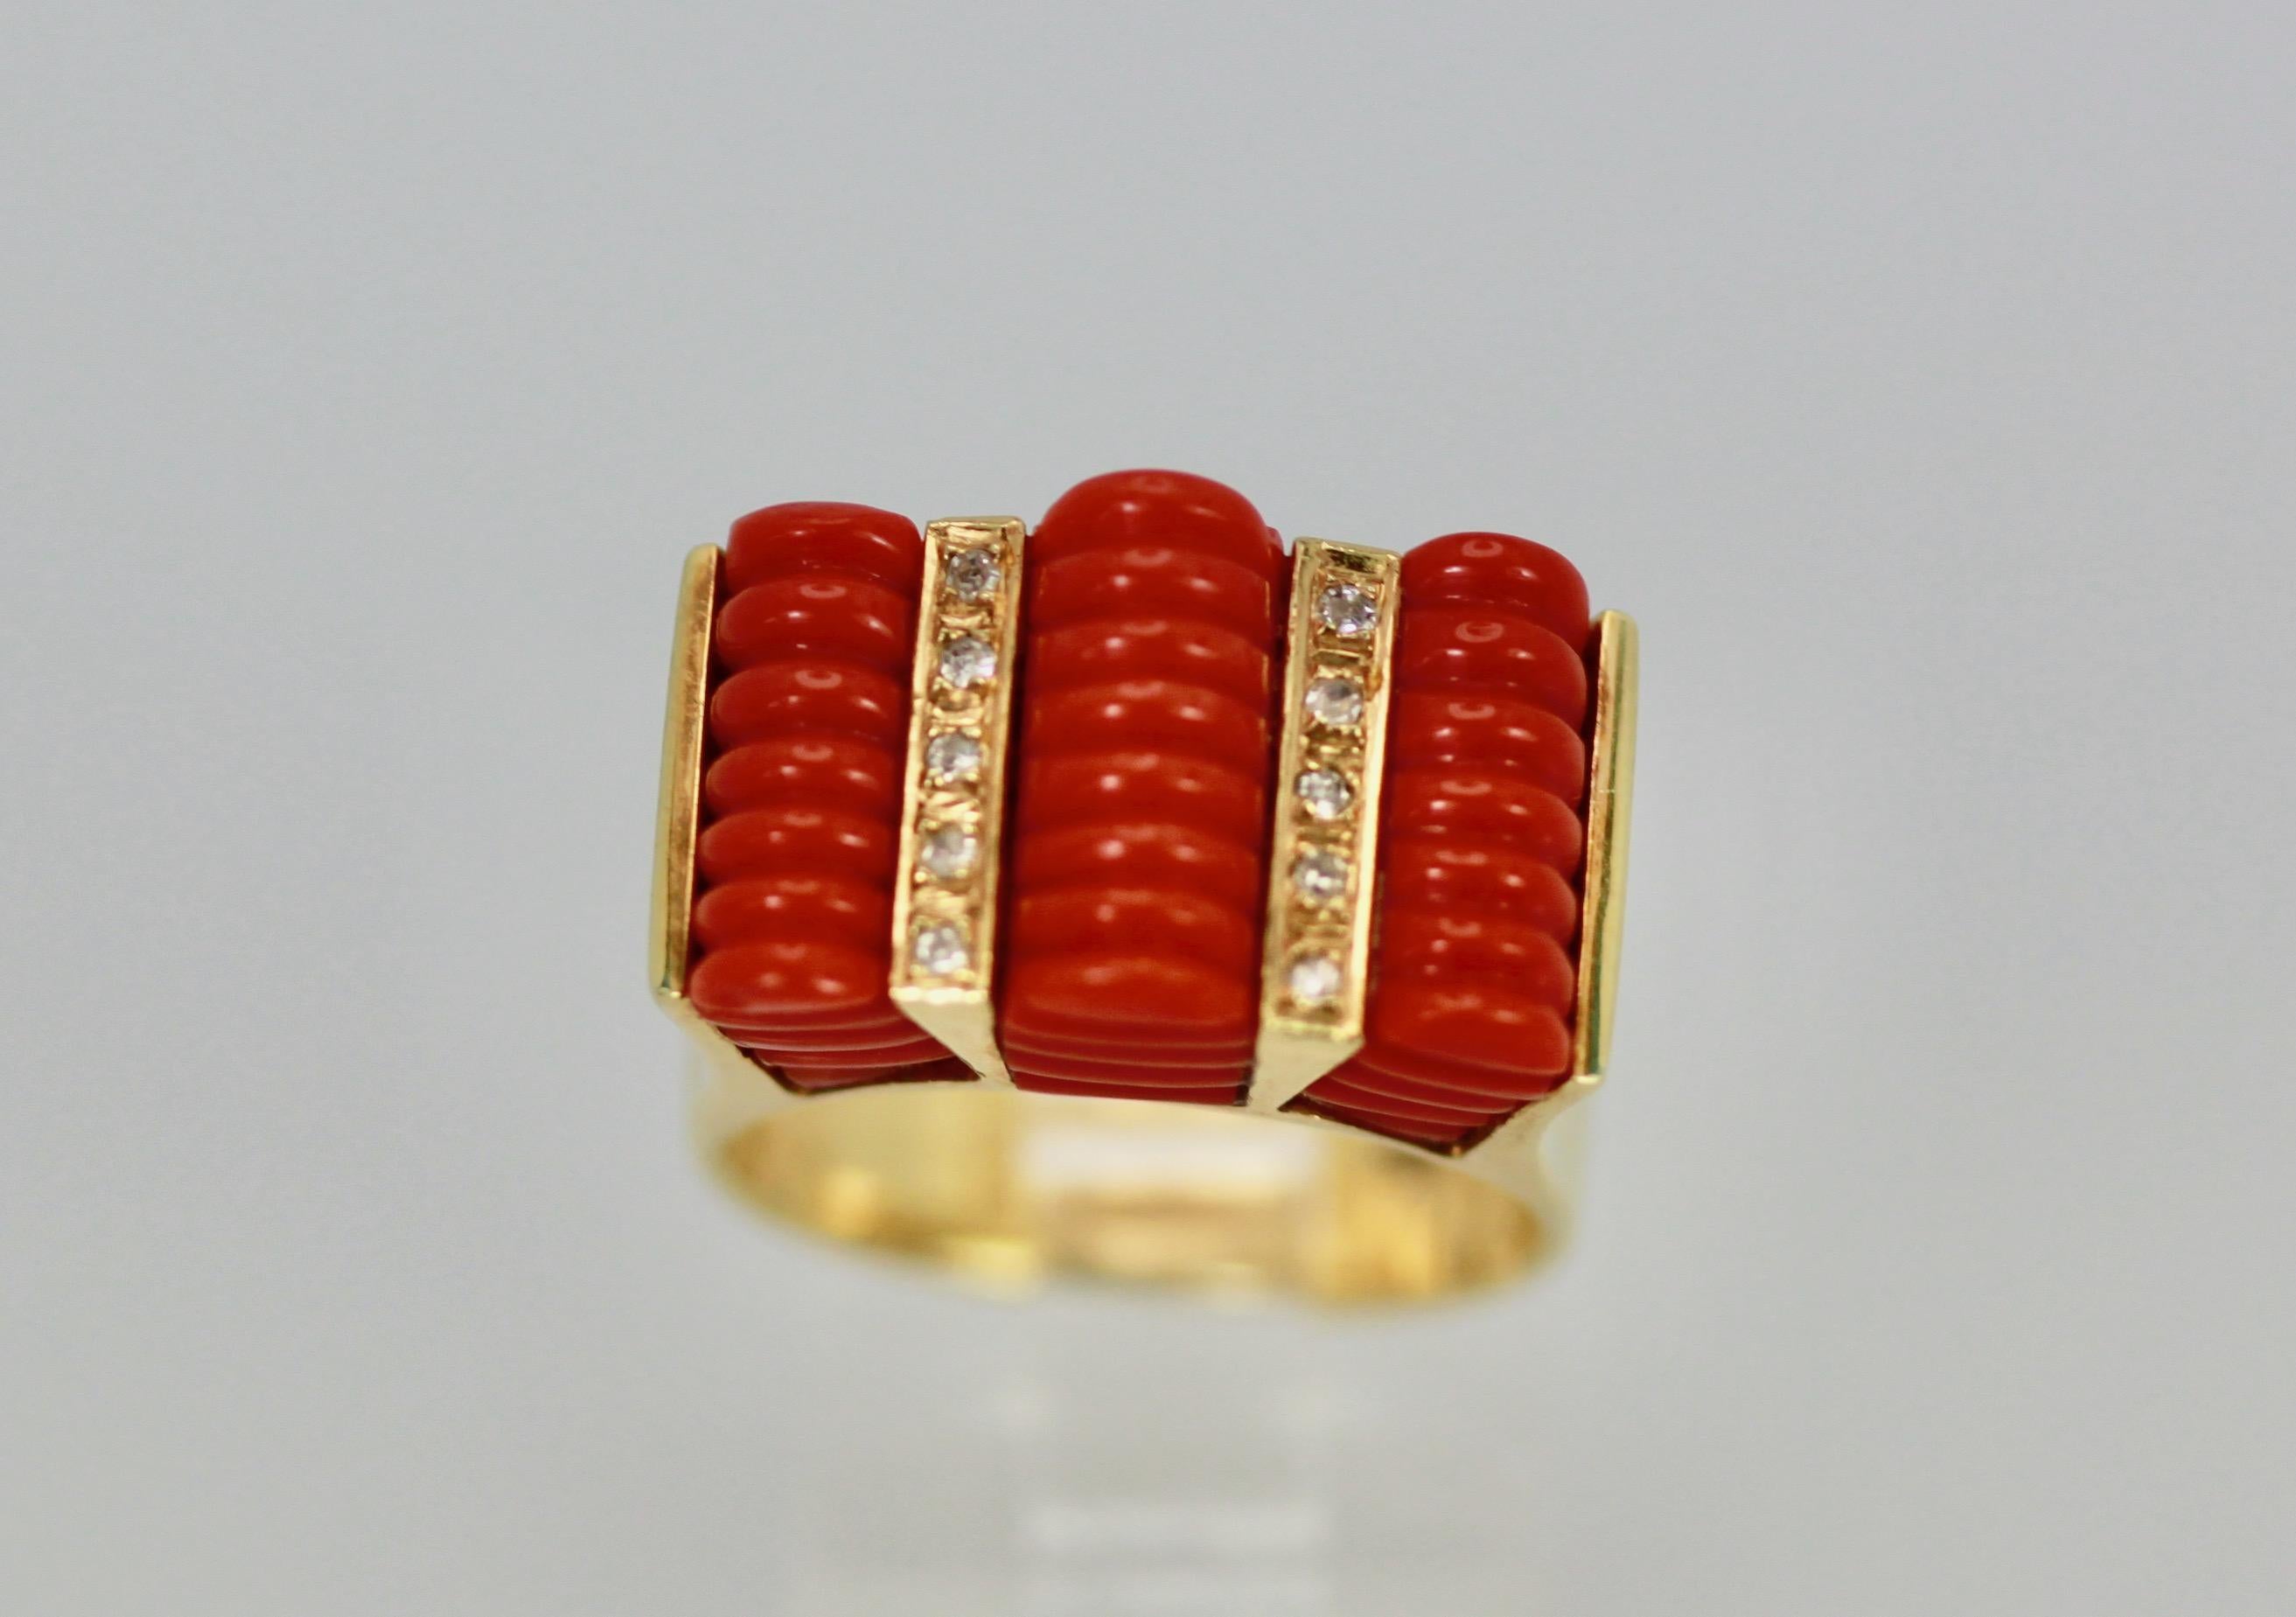 This fluted Coral ring is in near perfect condition.  The Coral is true mediterranean Coral as the color suggests.  There are two lines of Diamonds between the 3 sections of Coral.  Weight is 12.6 grams ring size 5 3/4 to 6.  This measures 18.75mm